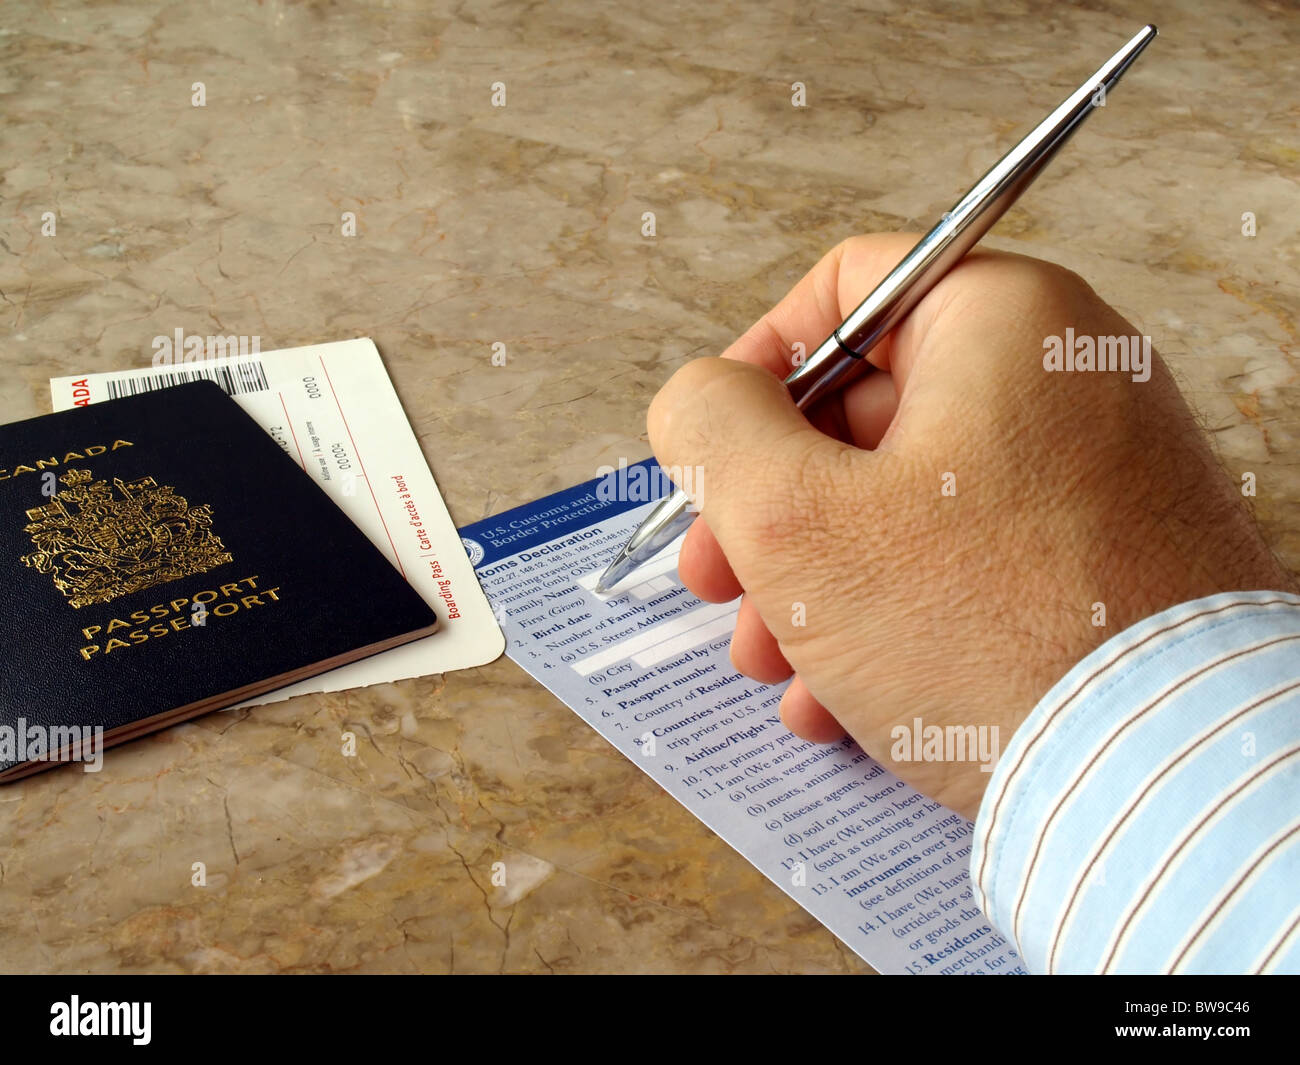 Man filling out U.S. customs and border form with Canadian Passport Stock Photo